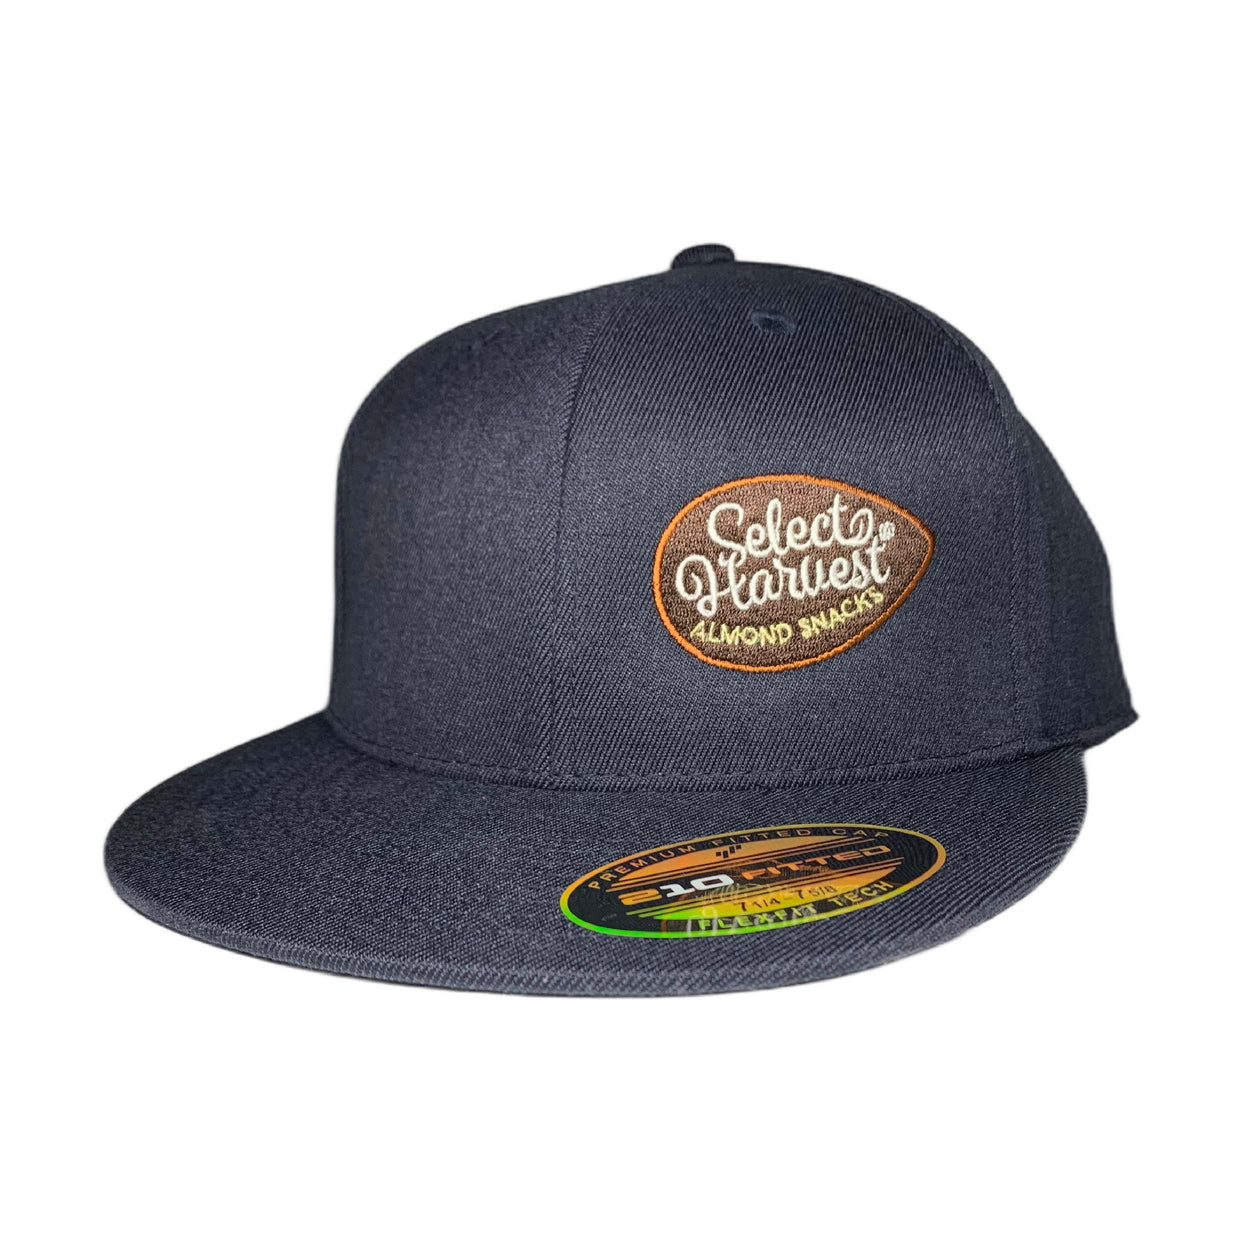 Fitted Hat, Solid Material, Select Harvest Almond Snacks logo